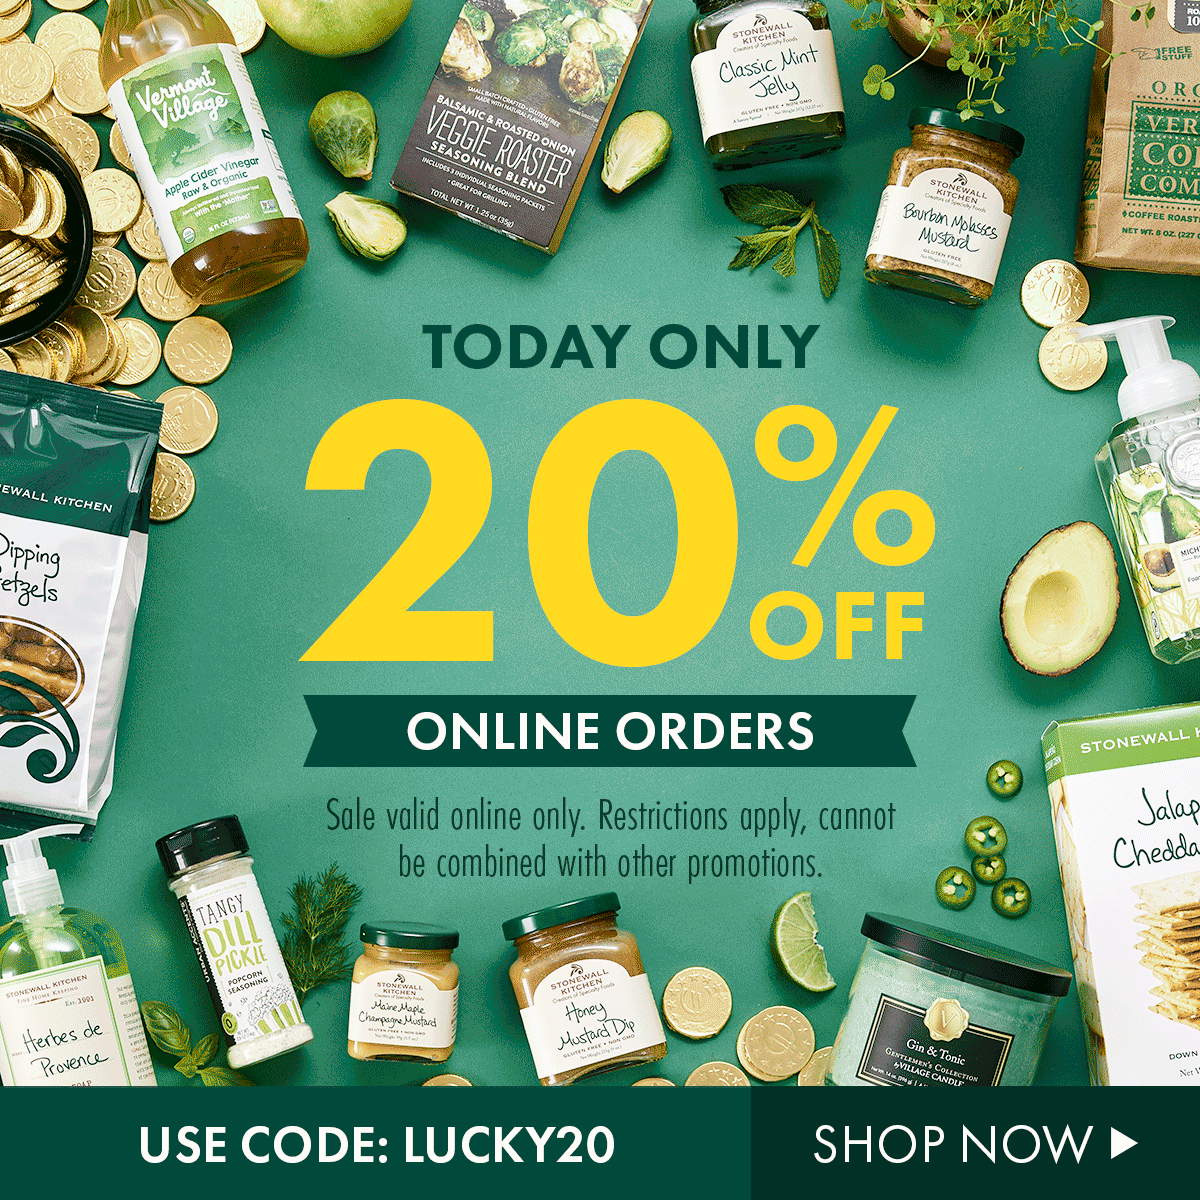 Today Only March 17 - 20% off online orders - Shop Now